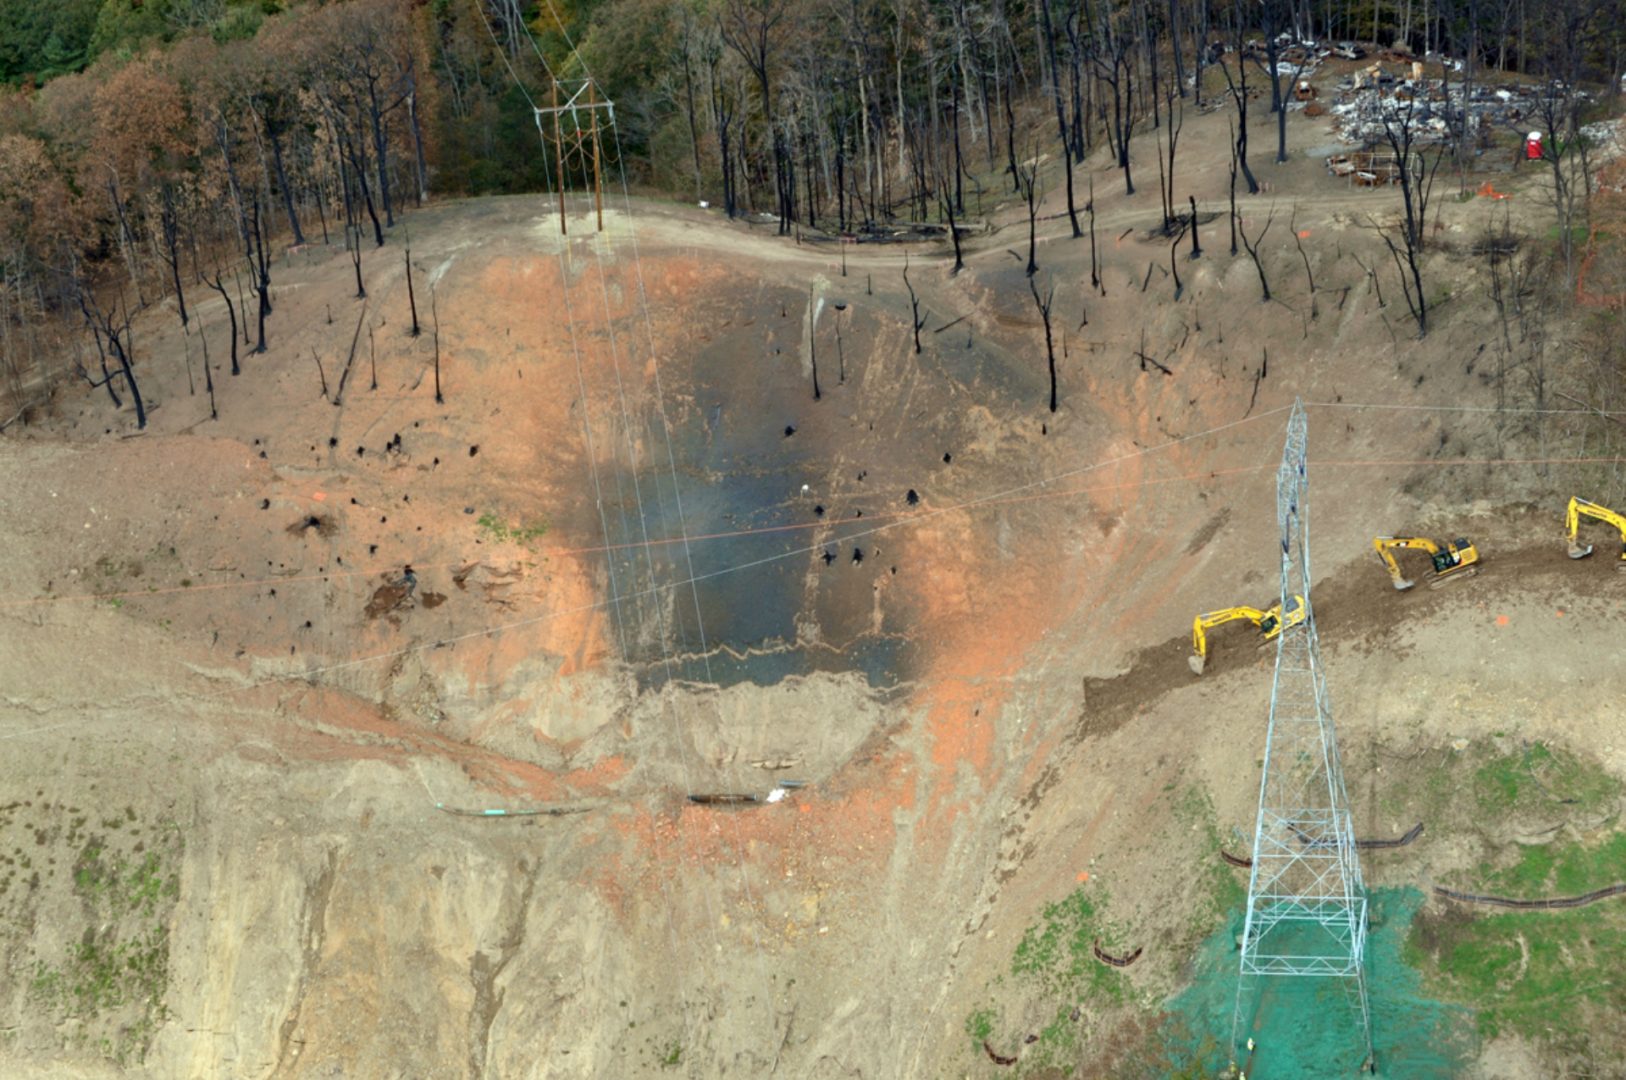 The site of the Revolution Pipeline explosion that occurred in September 2018. Officials have said said heavy rain caused a landslide, leading to the explosion, which destroyed a house.